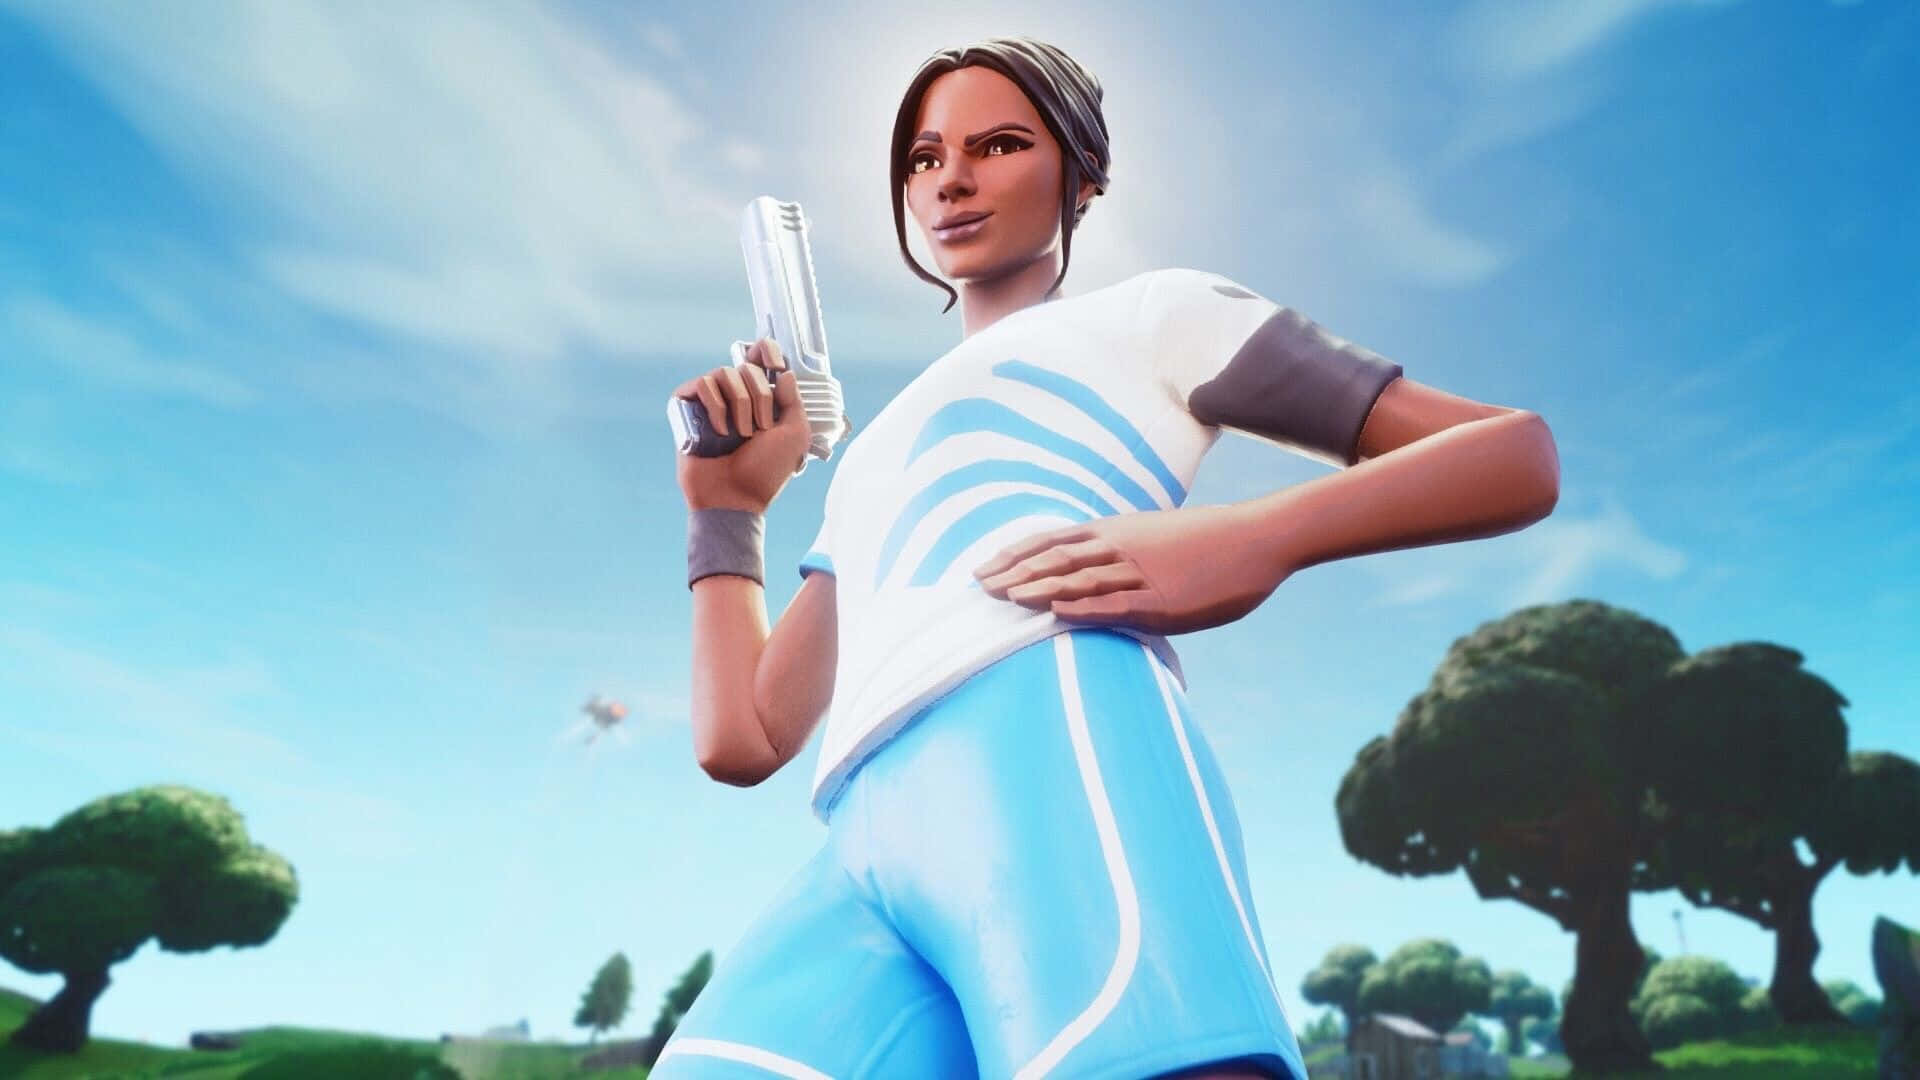 Outwit and outplay with the Poised Playmaker outfit from Fortnite. Wallpaper